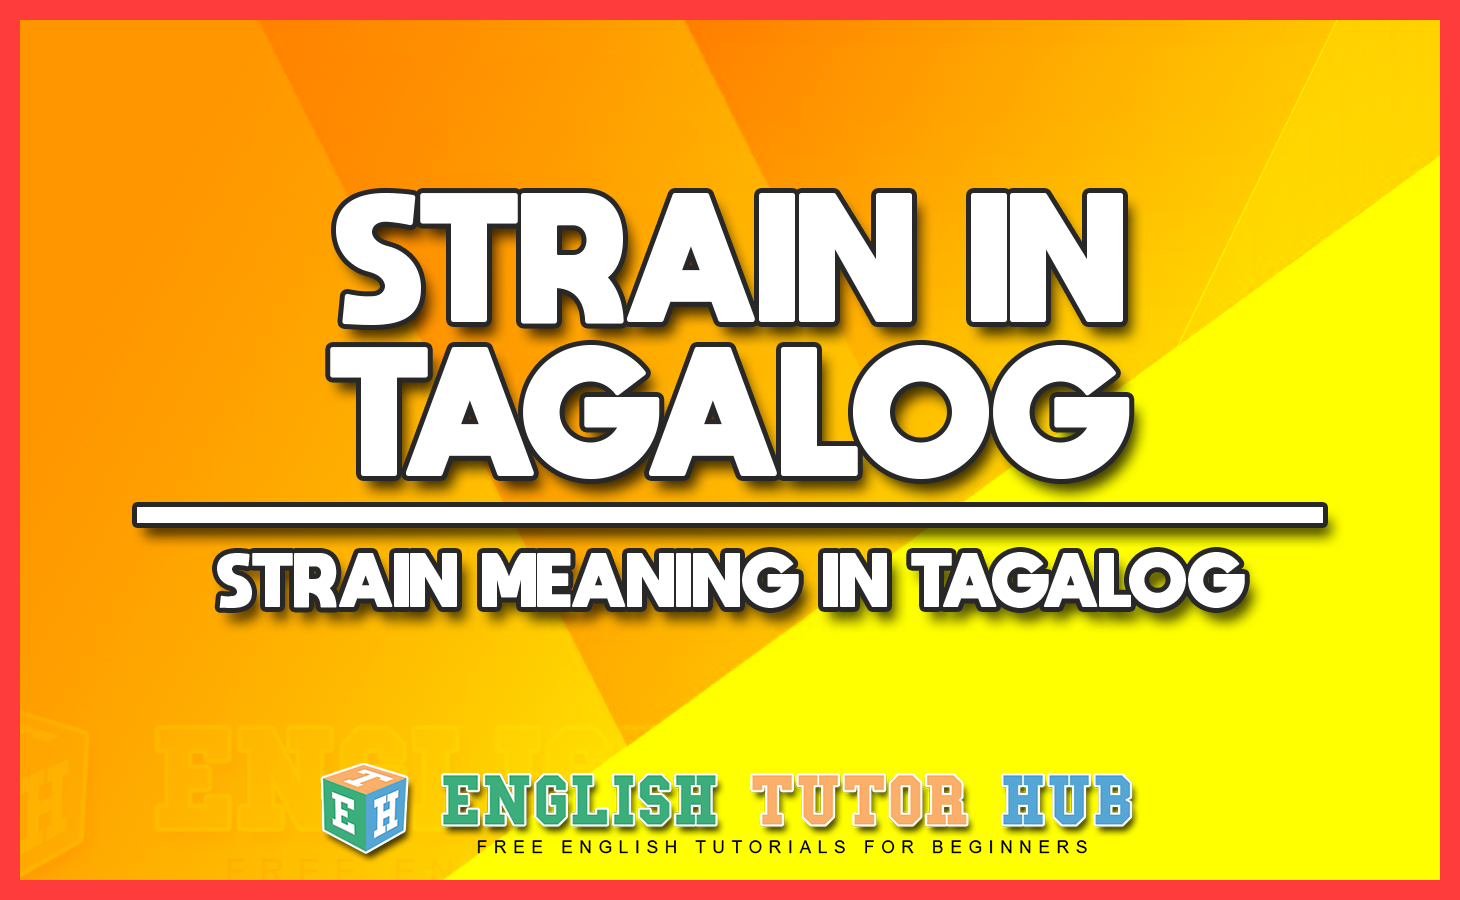 STRAIN IN TAGALOG - STRAIN MEANING IN TAGALOG